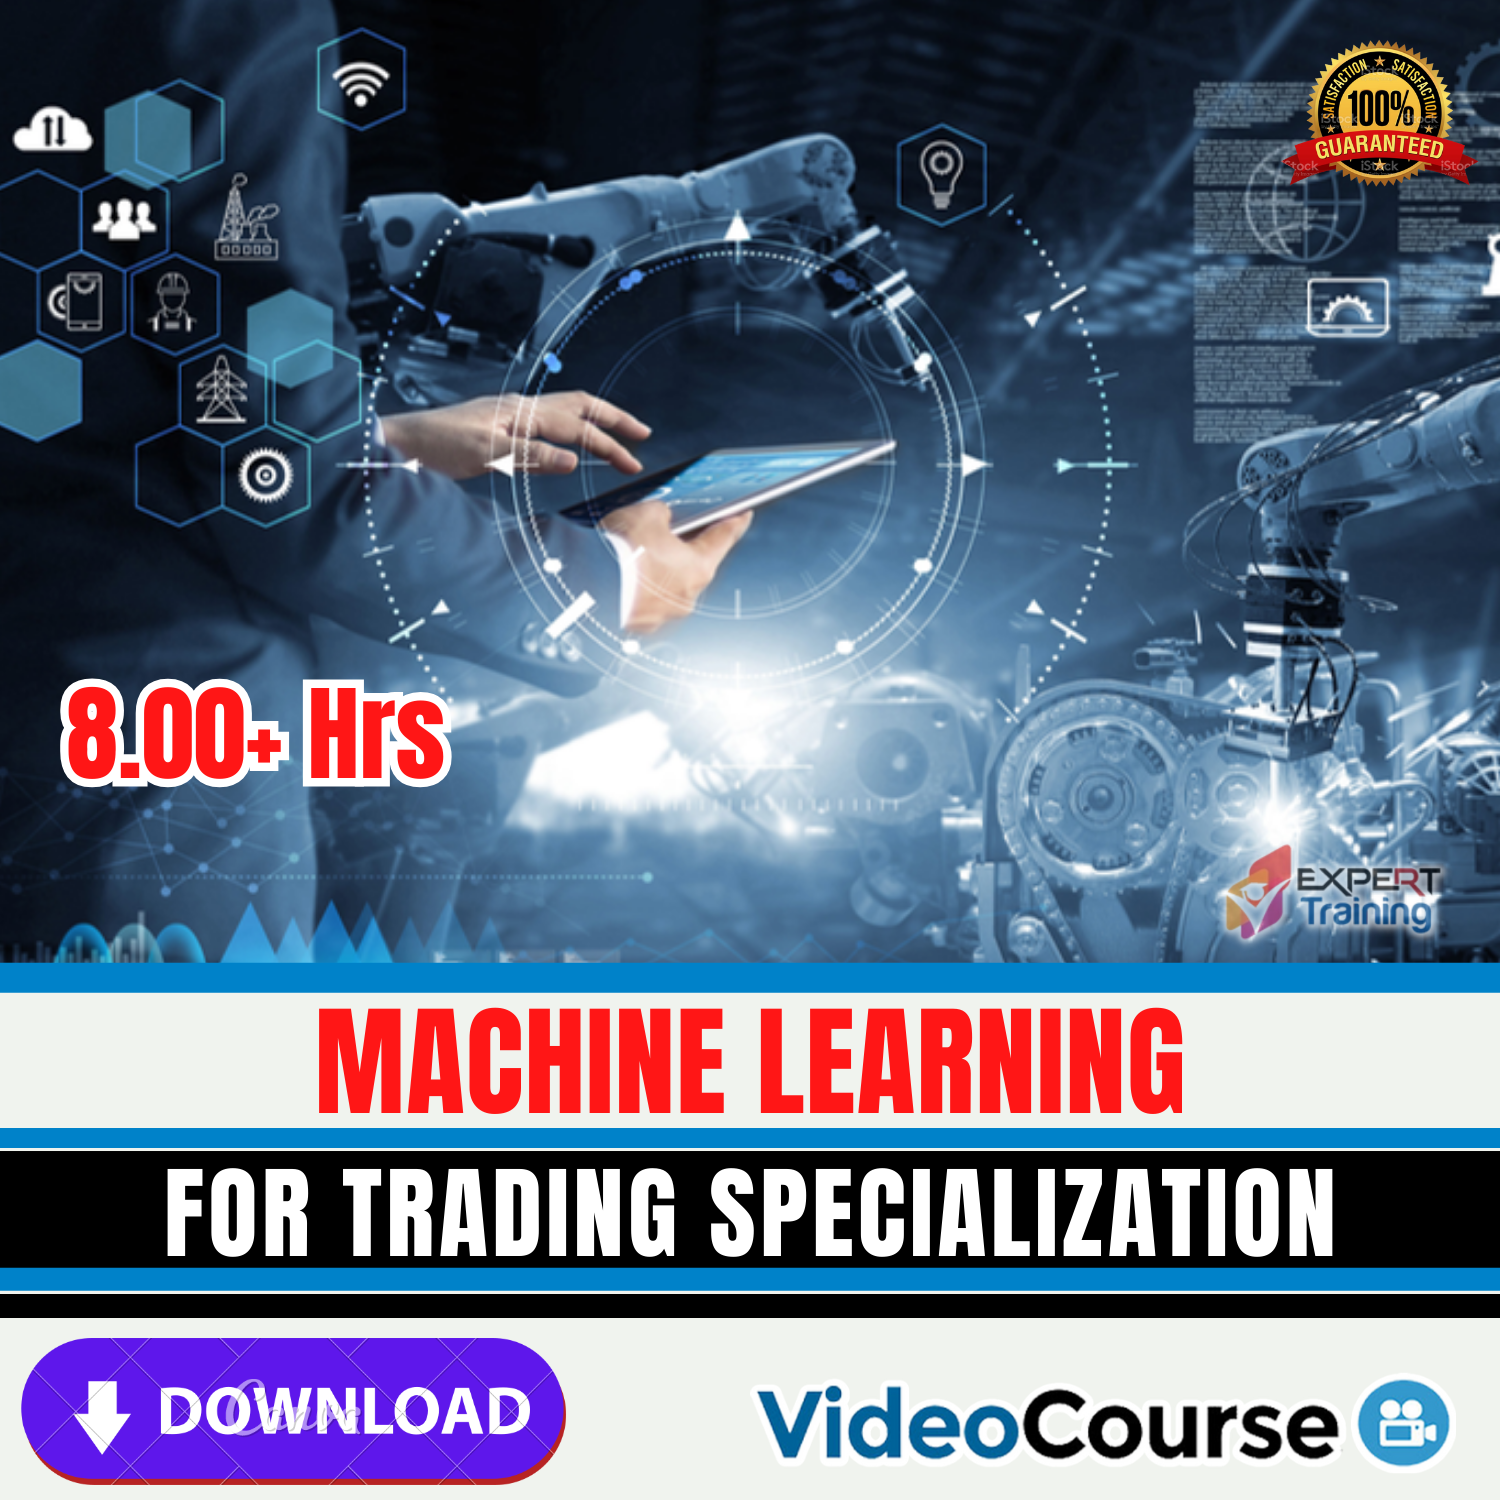 Machine Learning for Trading Specialization